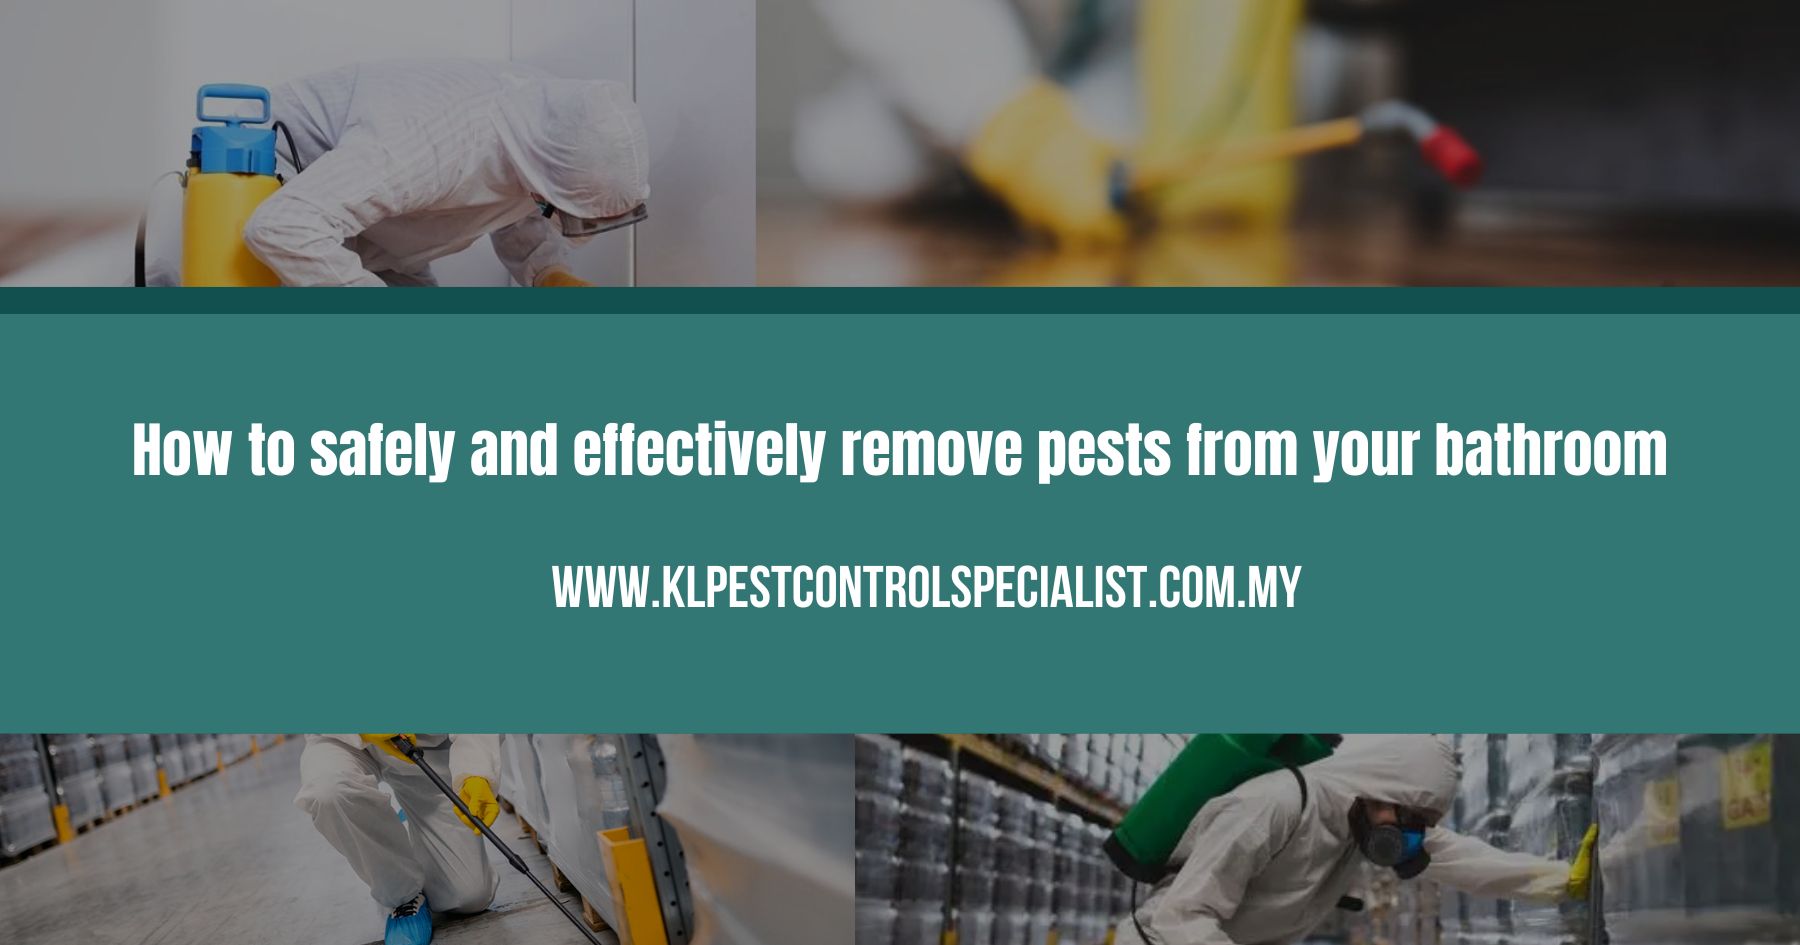 How to safely and effectively remove pests from your bathroom